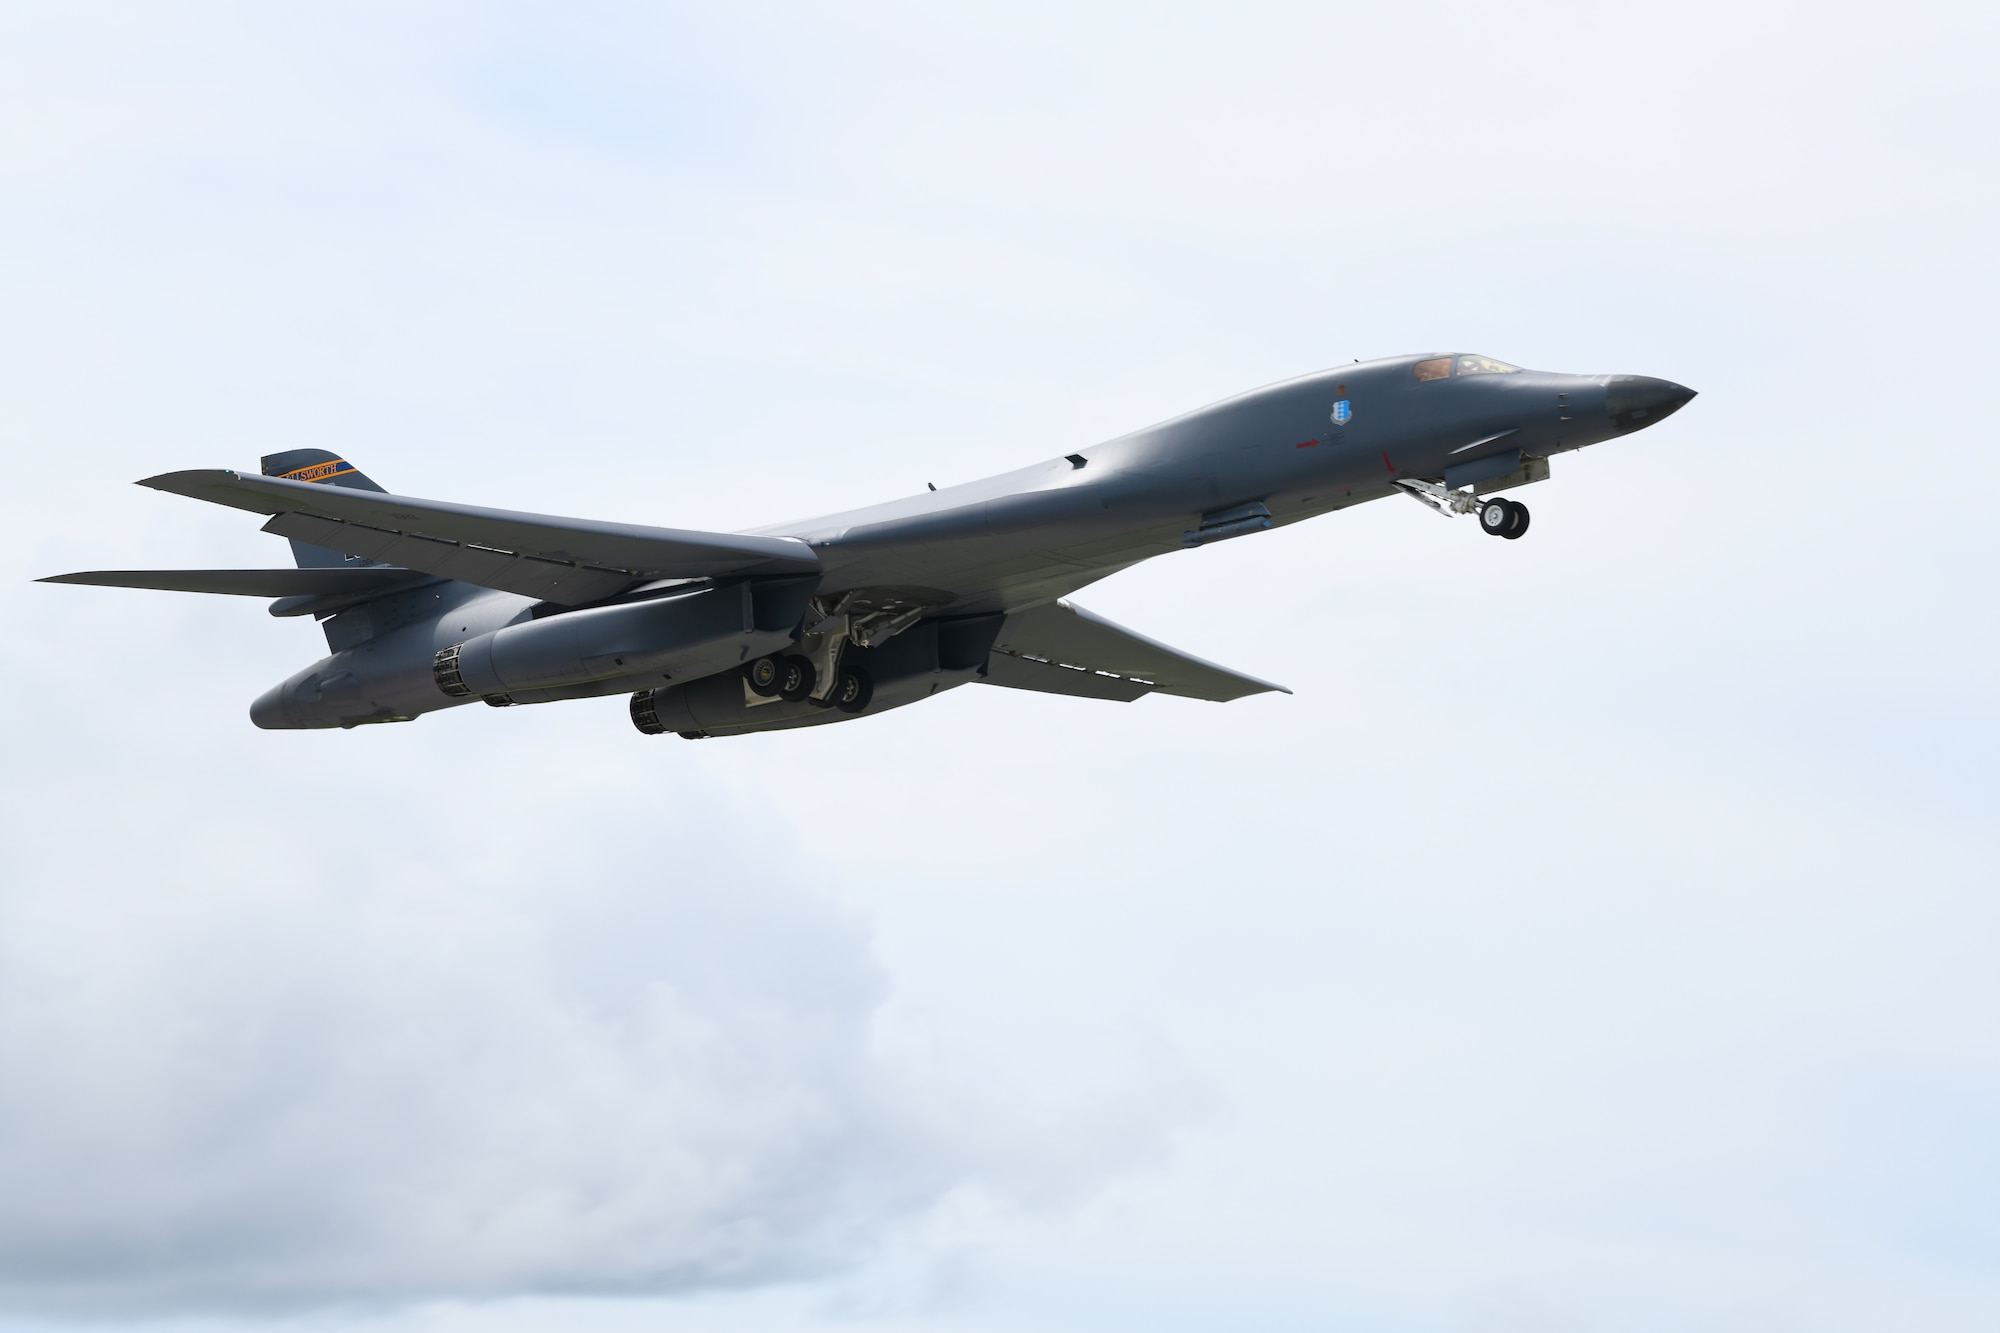 A B-1B Lancer assigned to the 28th Bomb Wing, Ellsworth Air Force Base, S.D., takes off in support of Exercise Valiant Shield at Andersen AFB, Guam, Sept. 17, 2020. The exercise is a U.S.-only field training exercise with a focus on joint training in a blue-water environment among U.S. Forces. (U.S. Air Force photo by Staff Sgt. Nicolas Z. Erwin)